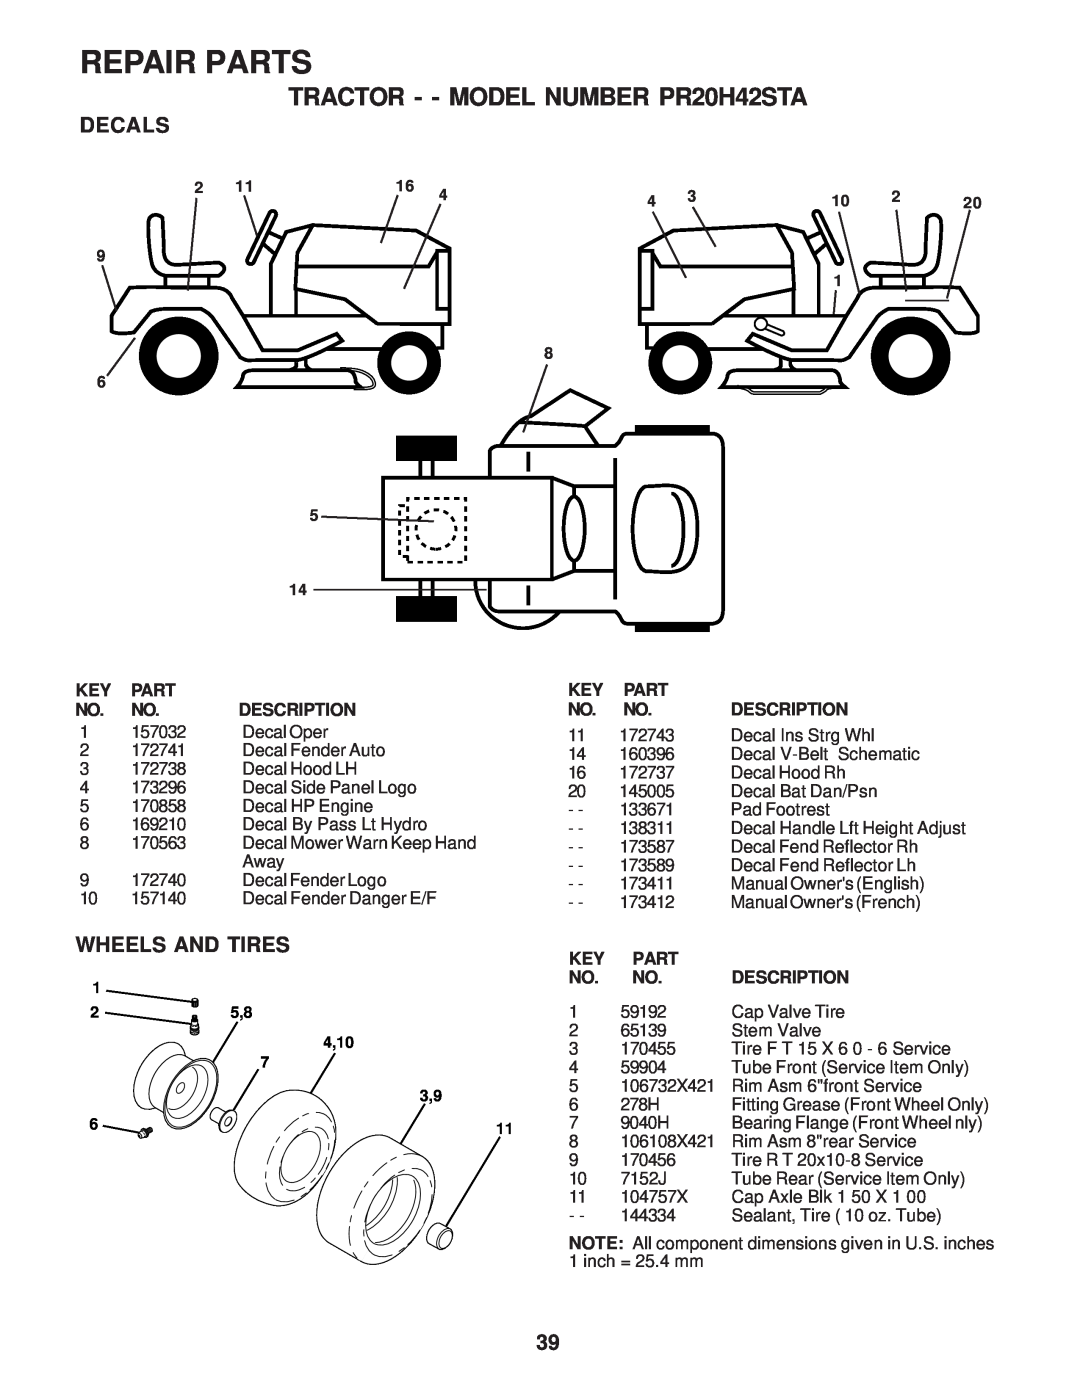 Poulan owner manual Decals, Wheels And Tires, Repair Parts, TRACTOR - - MODEL NUMBER PR20H42STA, 4,10 